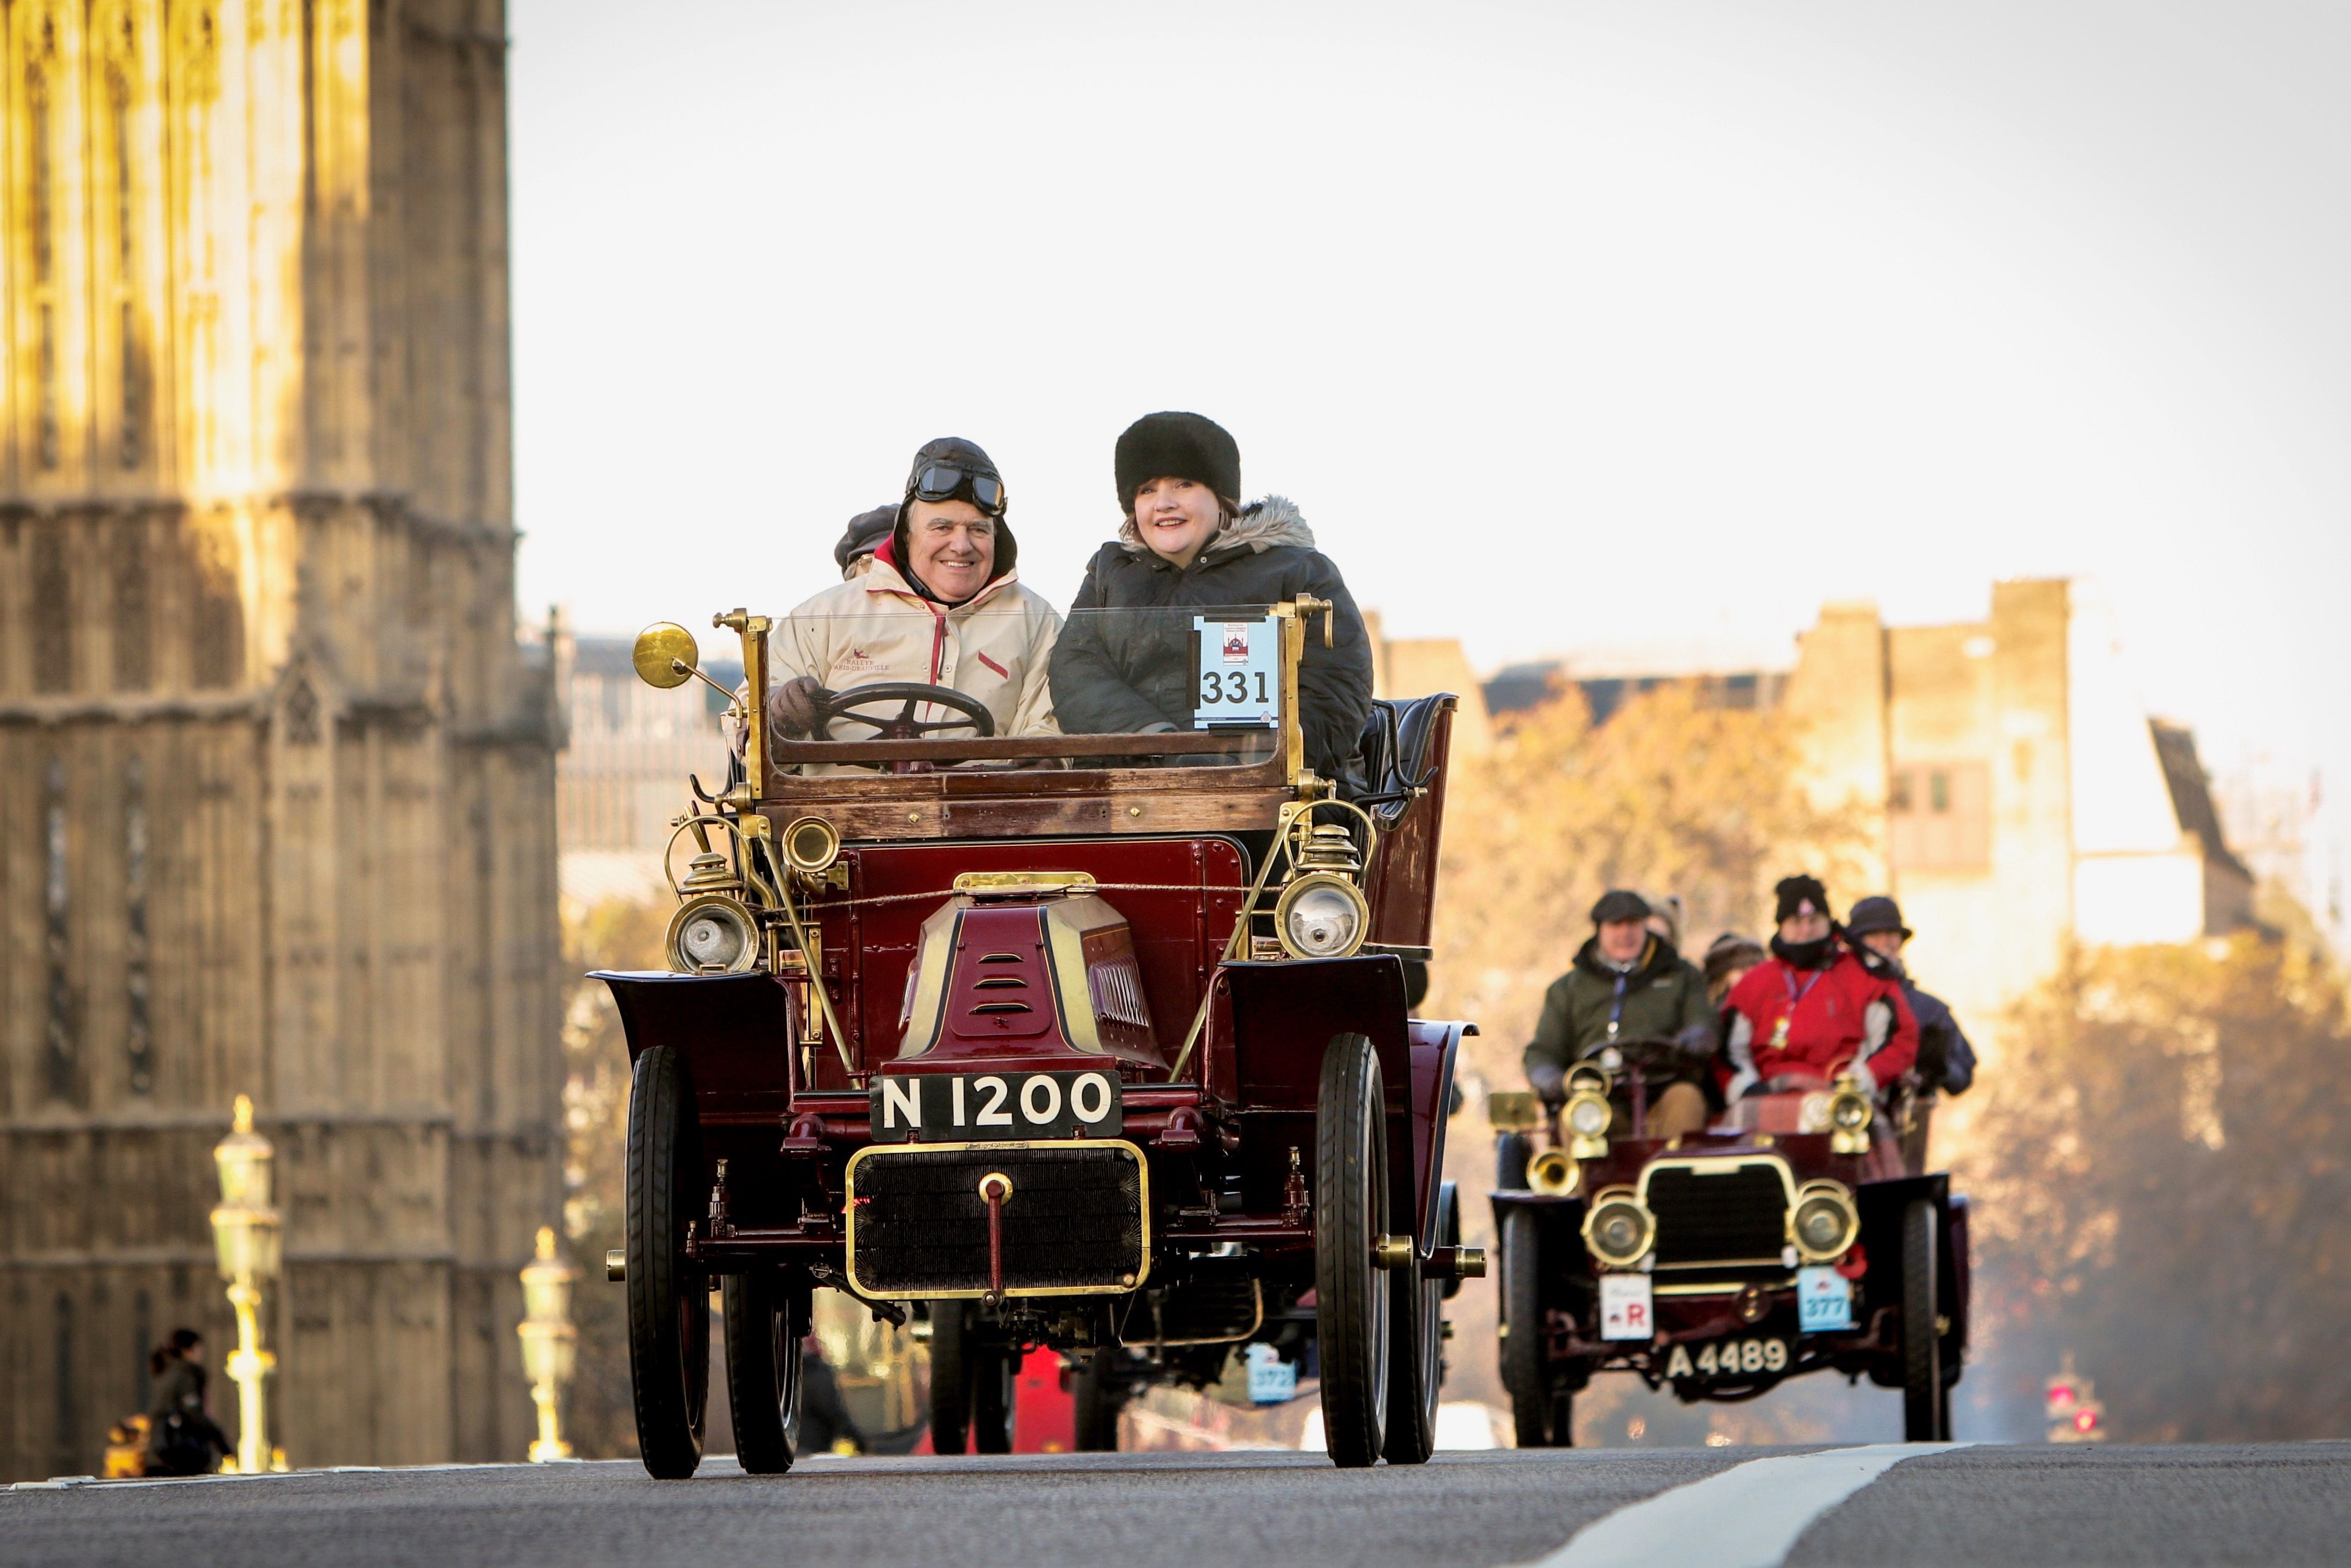 ENTRIES REVVING UP FOR 125th ANNIVERSARY LONDON TO BRIGHTON